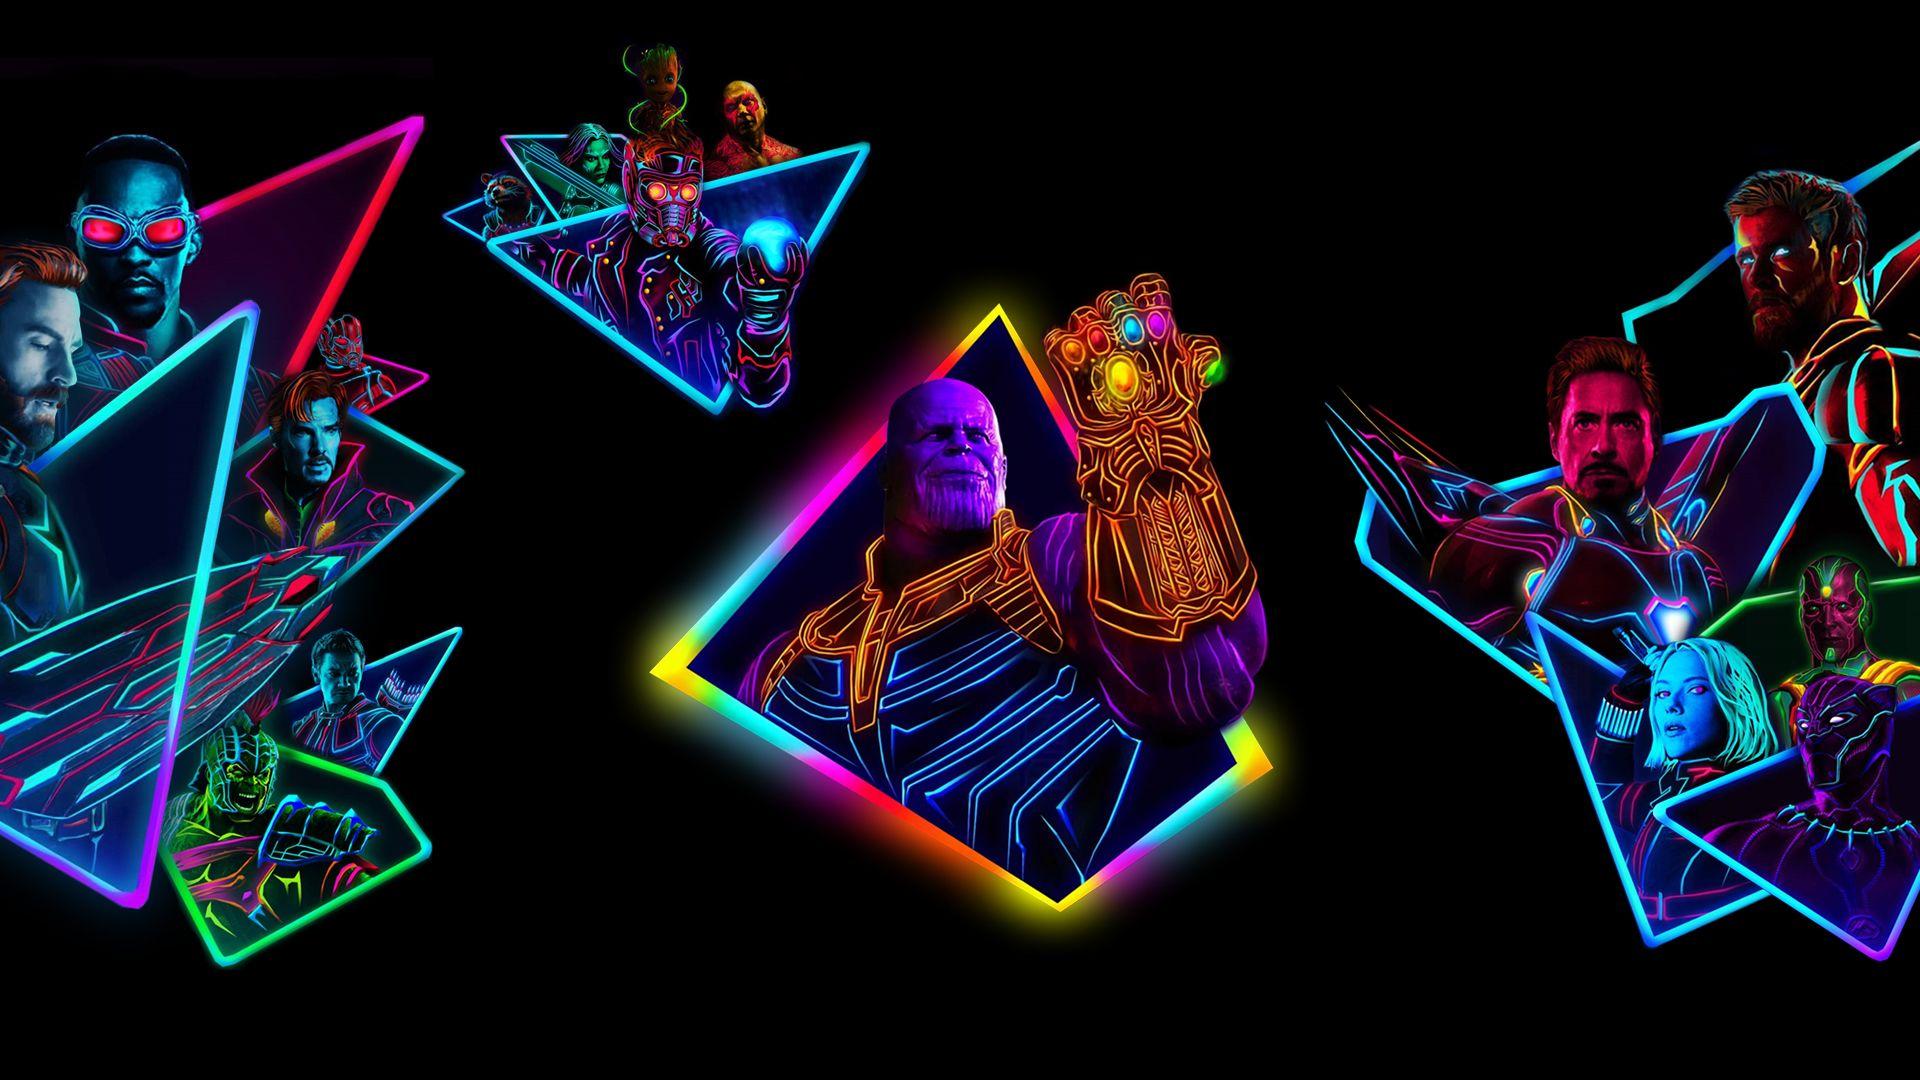 Avengers Infinity War 80s Neon Style Art Wallpaper, HD Movies 4K Wallpaper, Image, Photo and Background